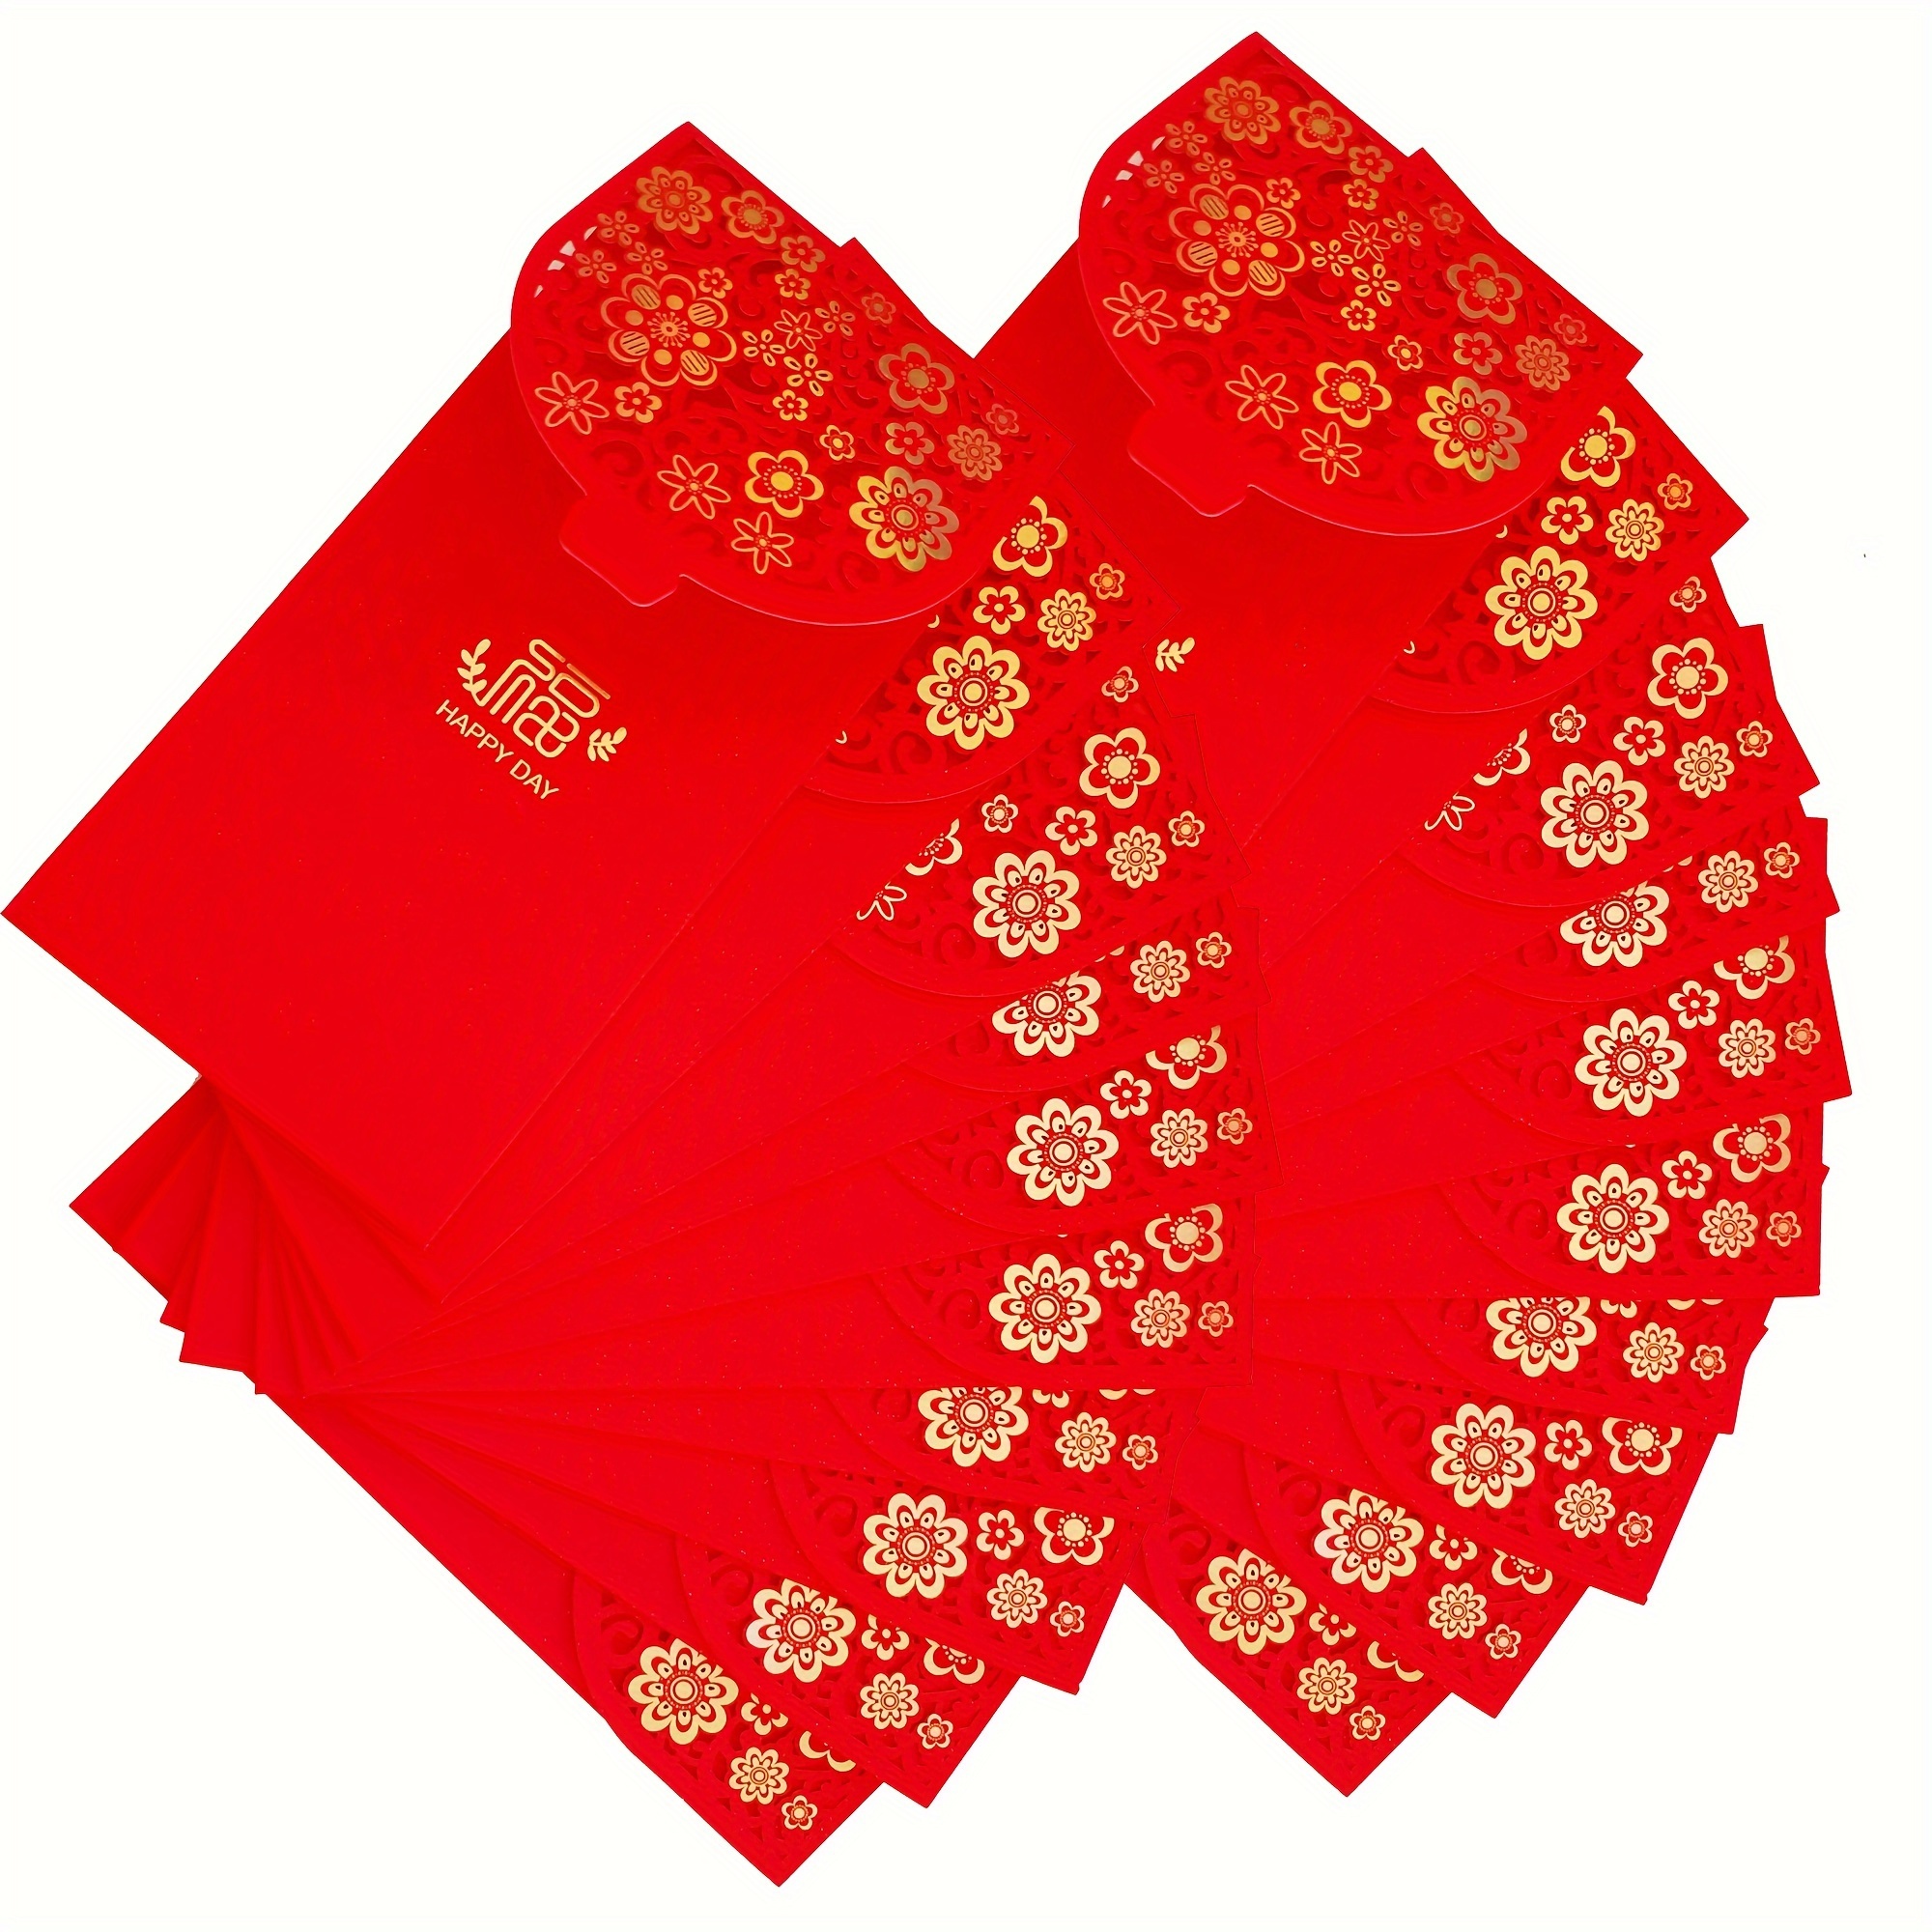 Hermes 2023 Red Envelopes Lunar New Year - Year of the Rabbit